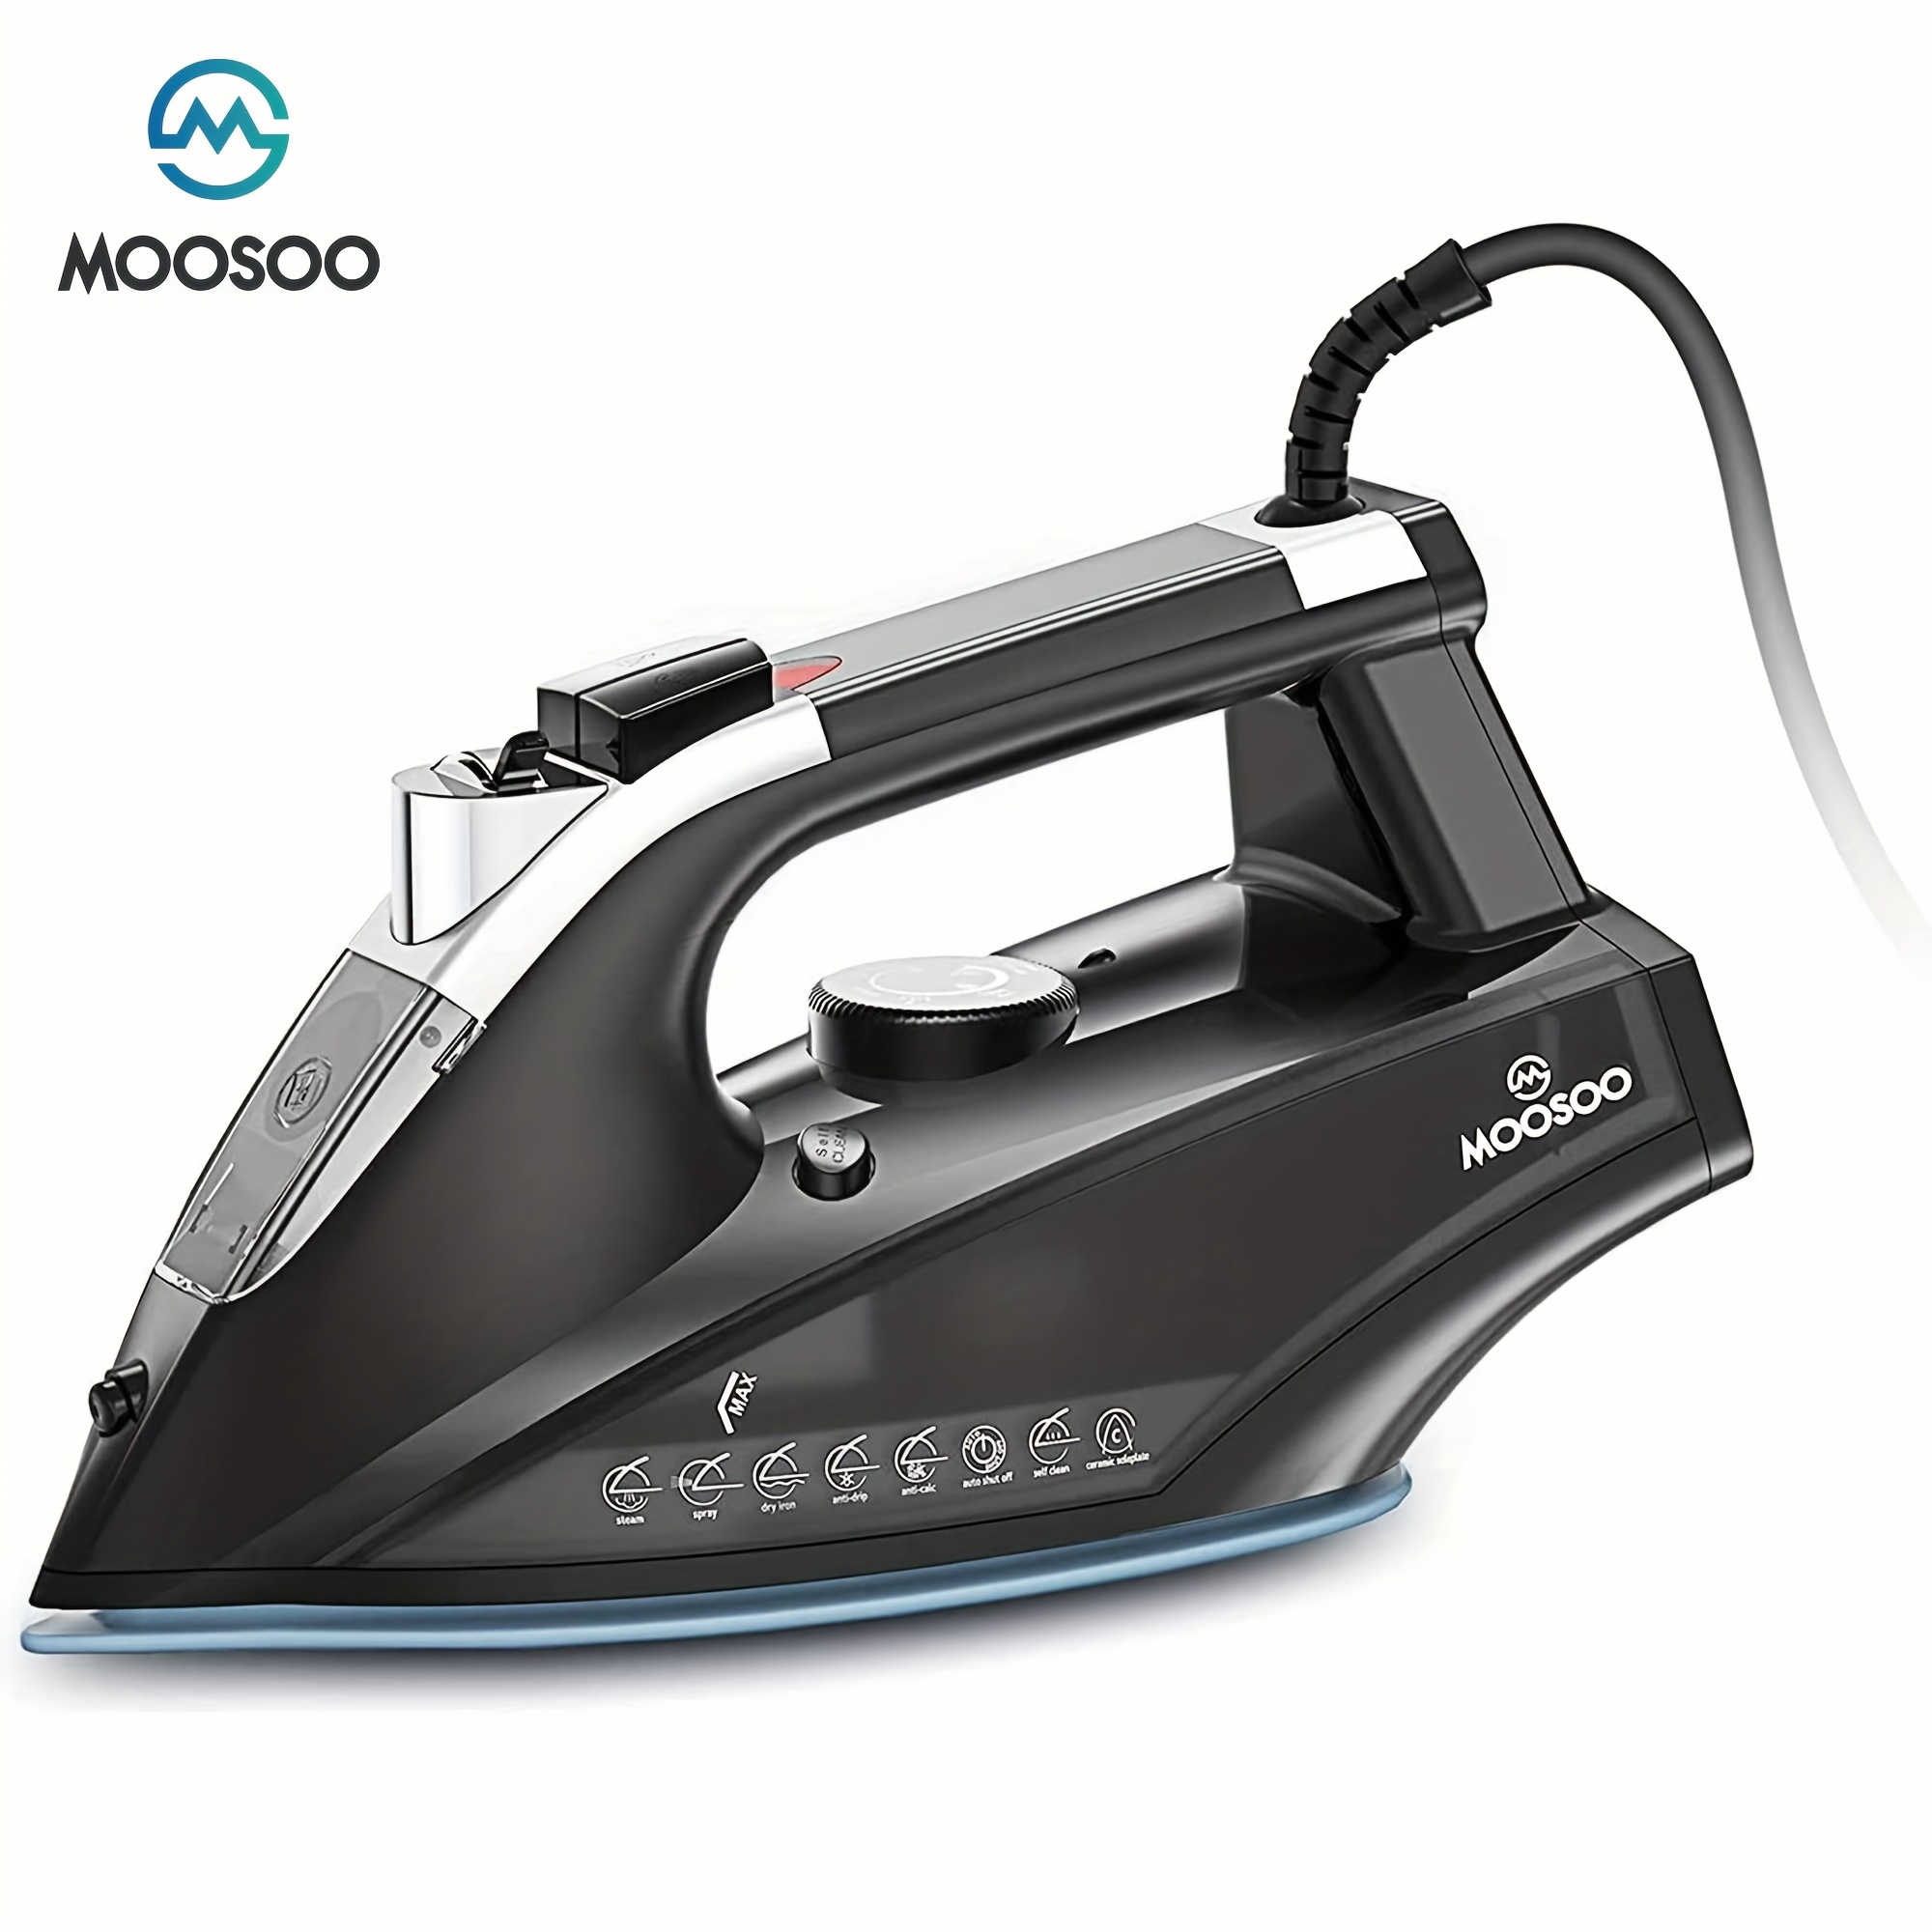 

Moosoo Steam Iron, Professional 1800w Lightweight Steamer Iron For Clothes, Non-stick Ceramic Steam Dry Iron With Anti-drip, Auto-off, 470ml Water Tank St1800